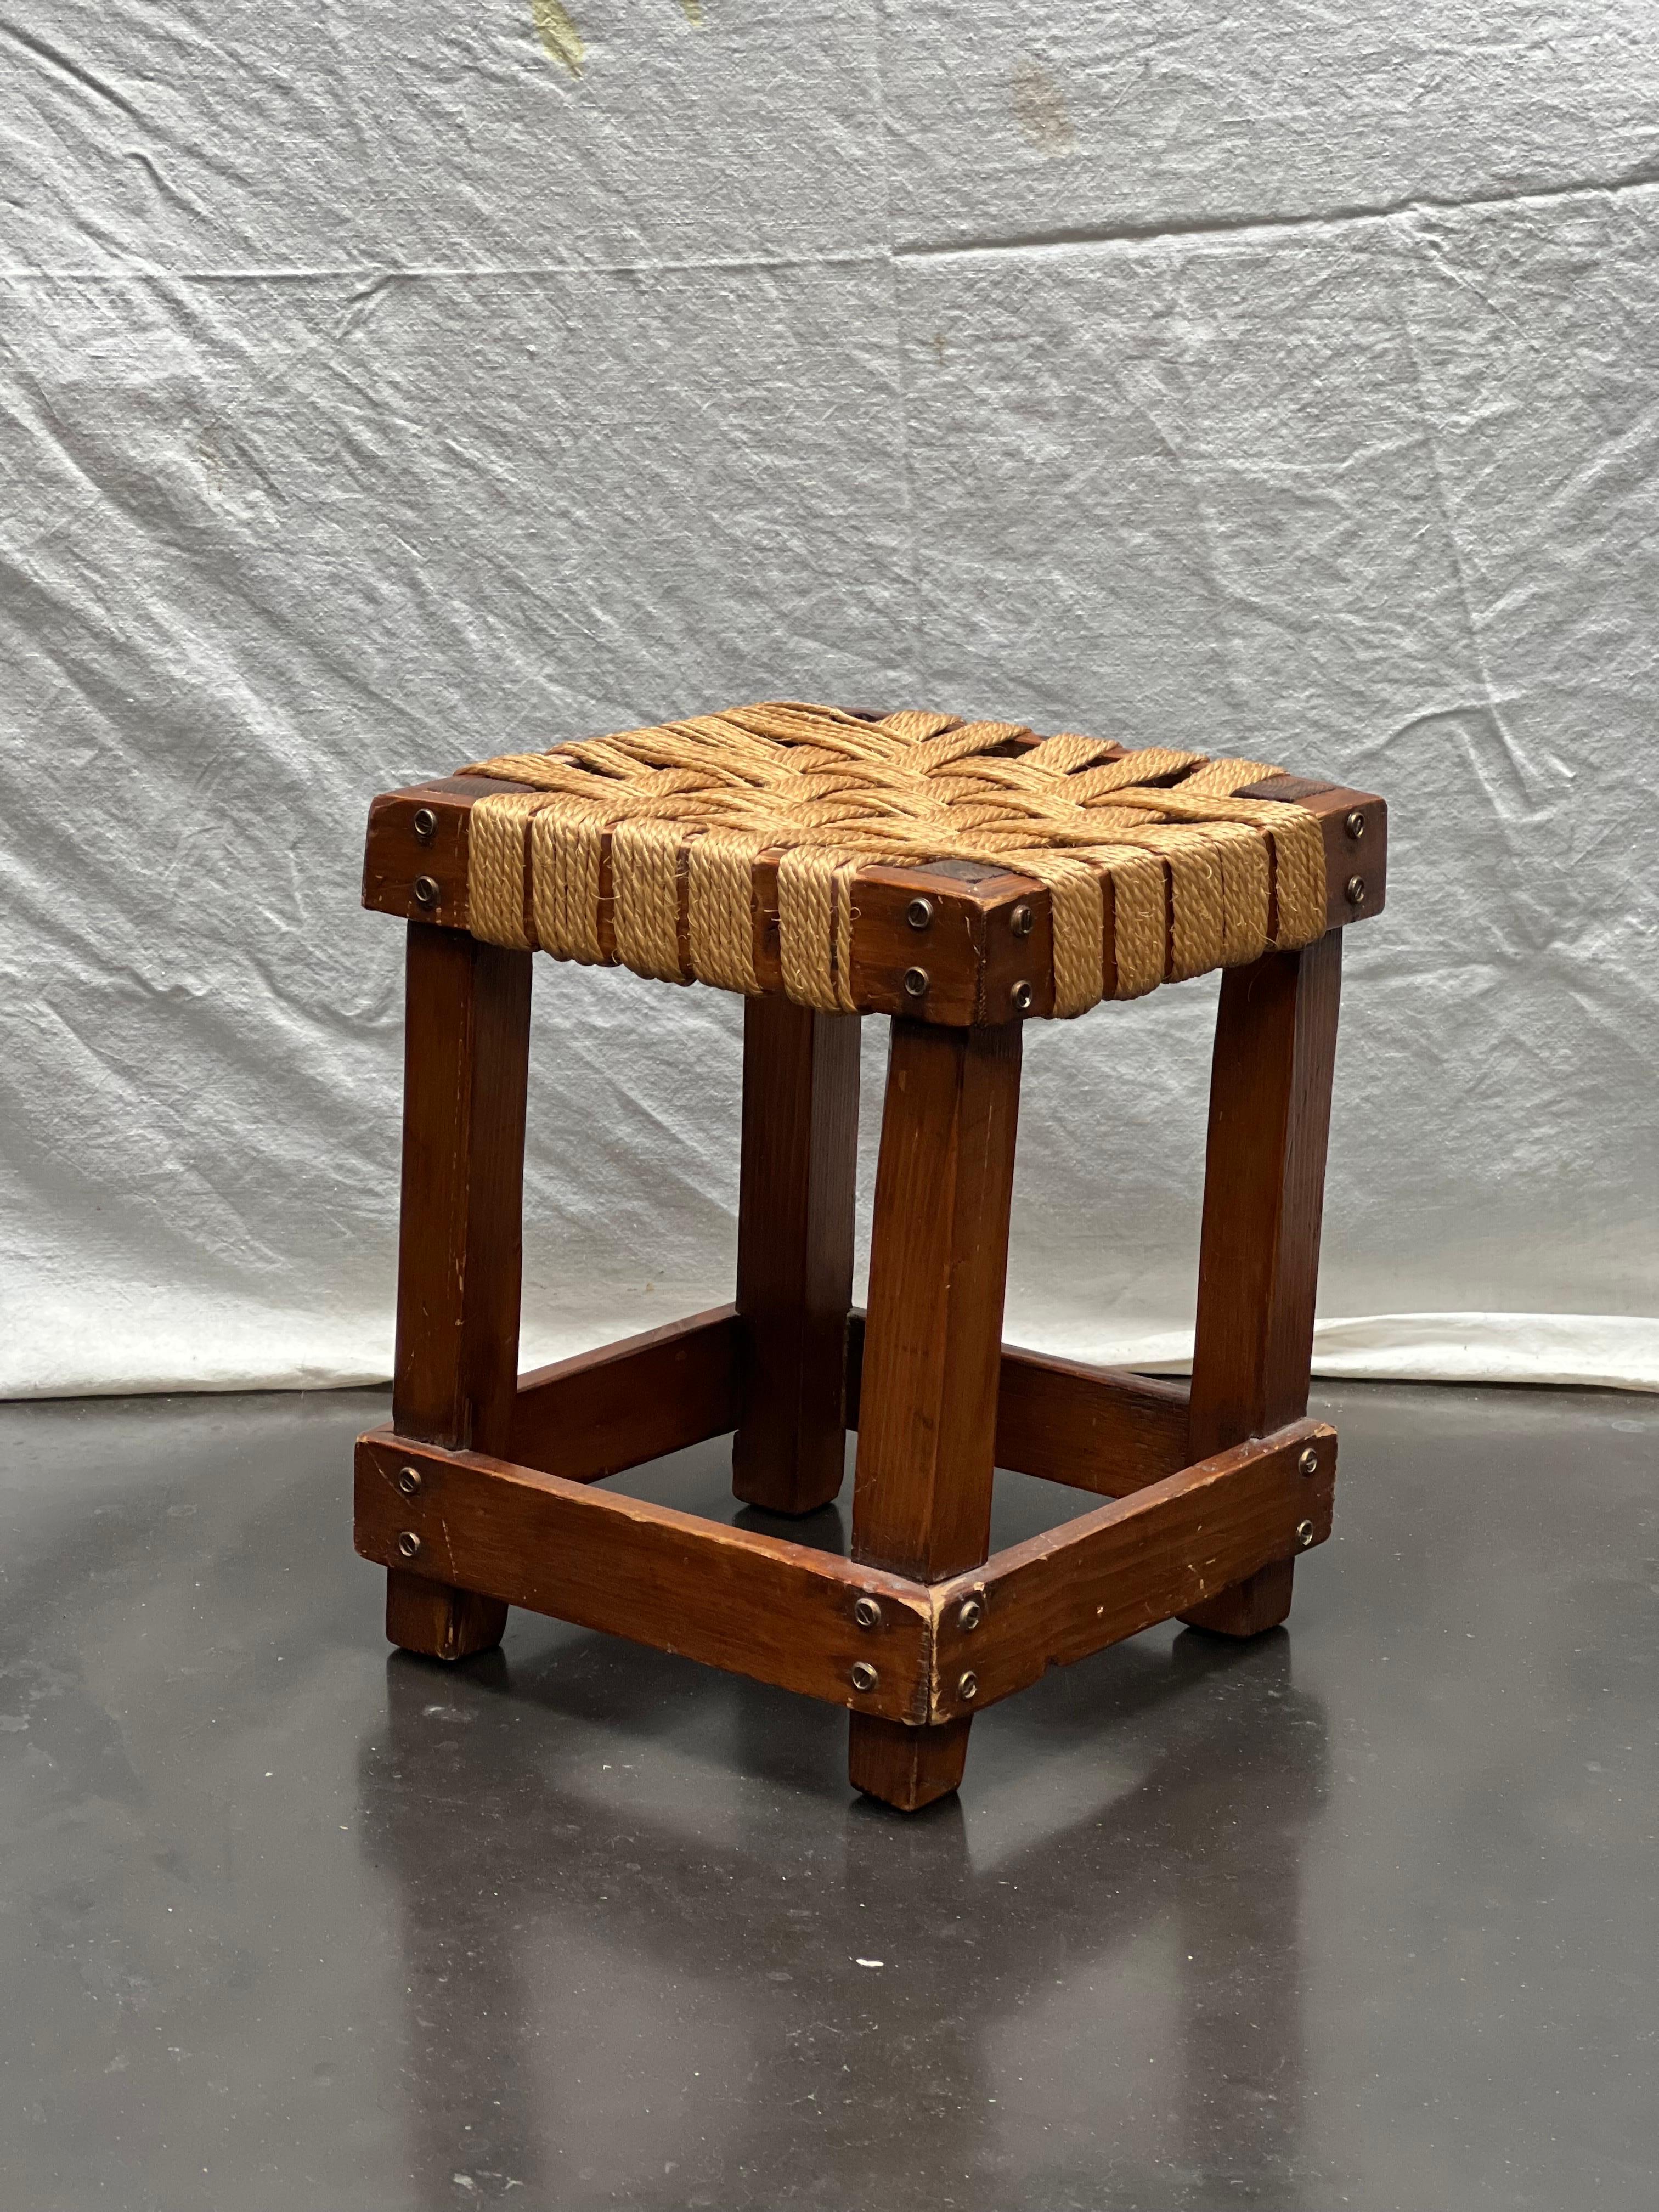 Cute Dutch stool. Very strong and good condition. Perfect as a side table or a normal seating with a table. Could be great as nightstand or next to a bath. Very decorative